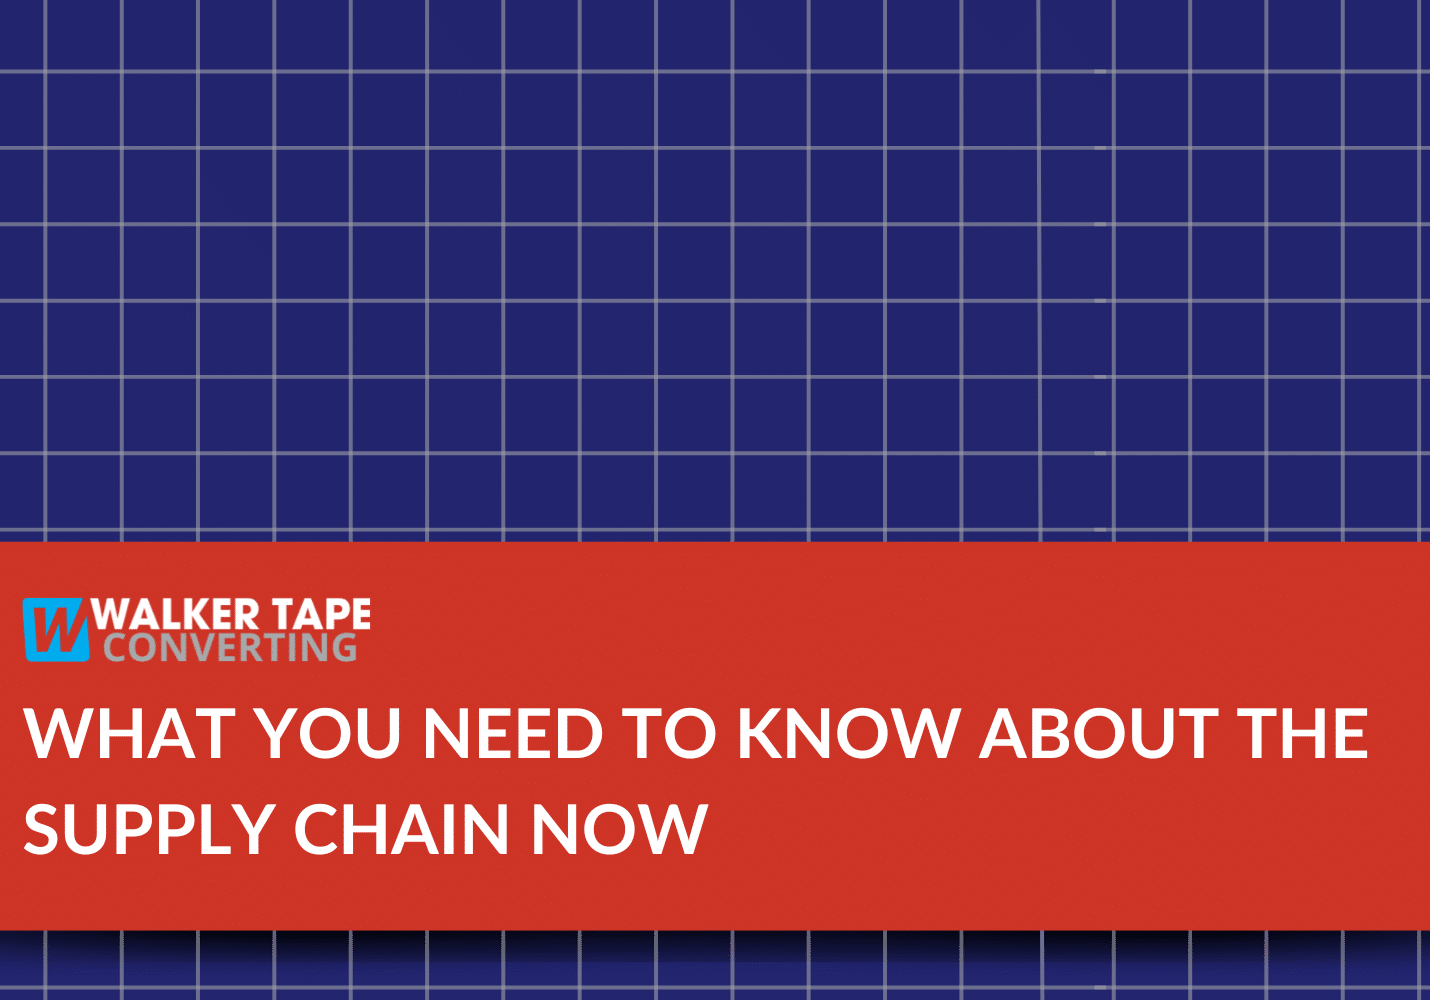 What you need to know about the supply chain now - graphic